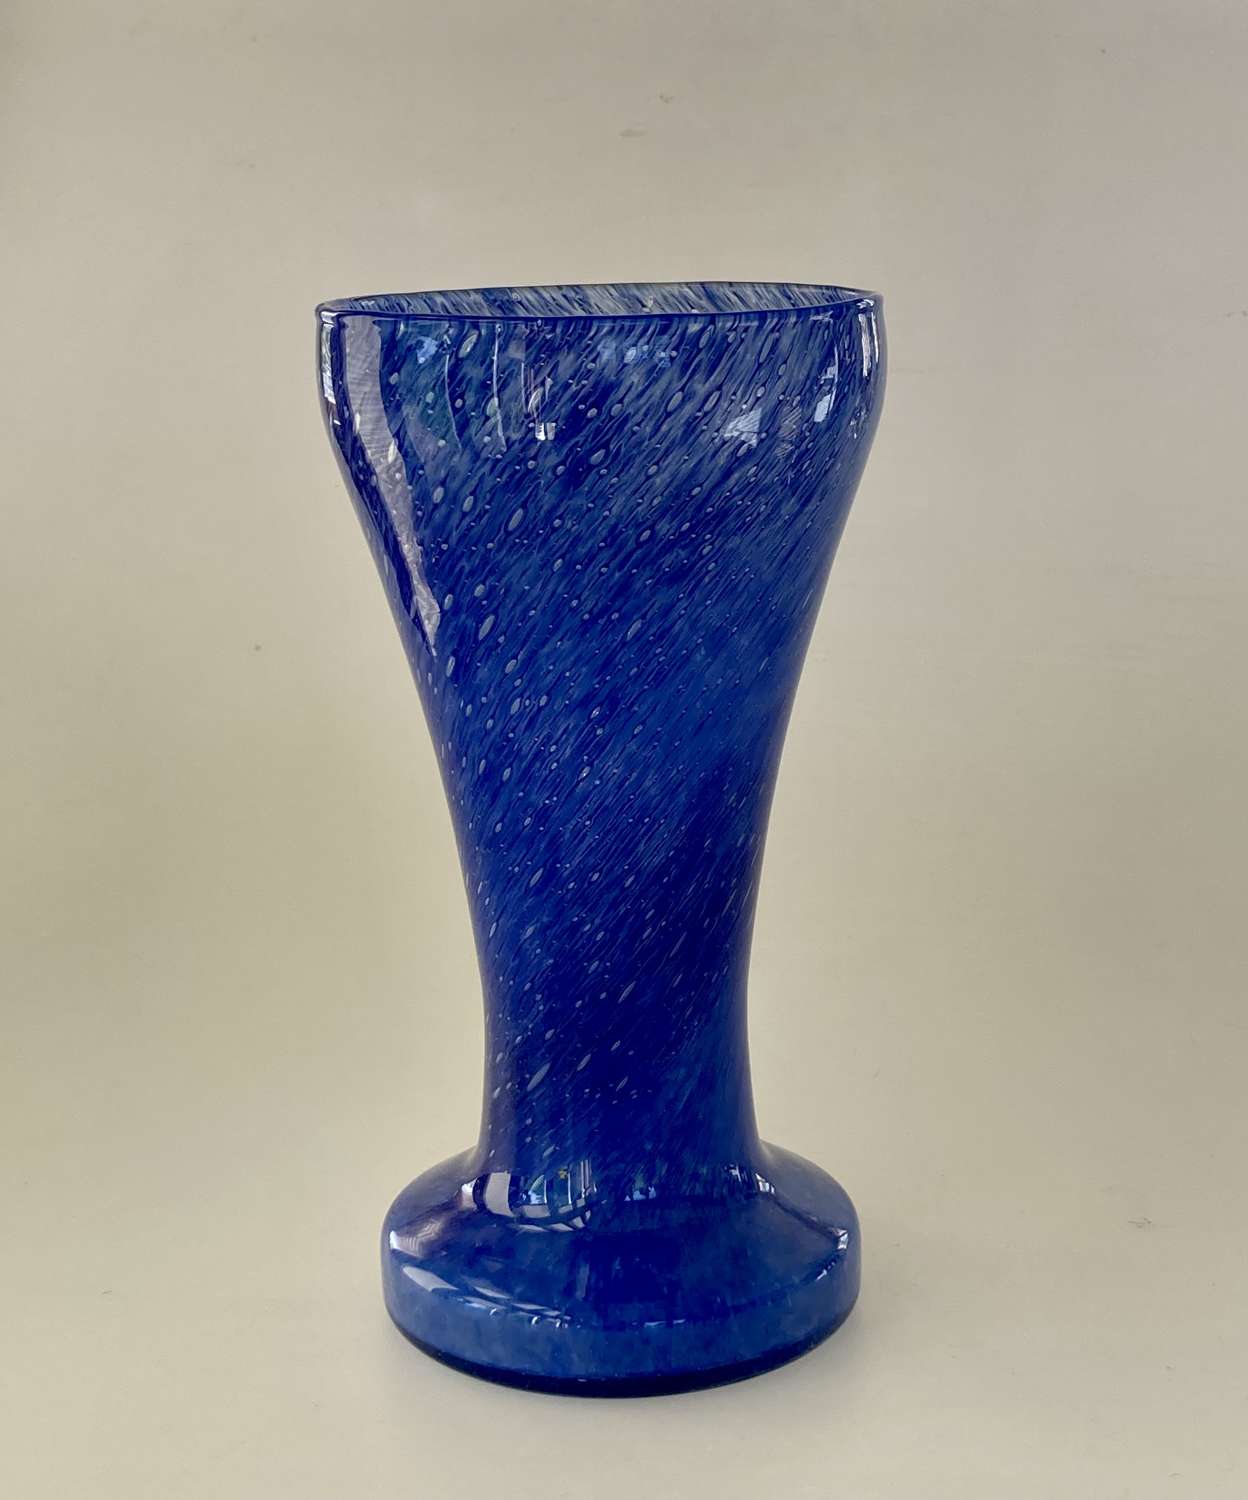 Blue cloudy vase by Nazeing .